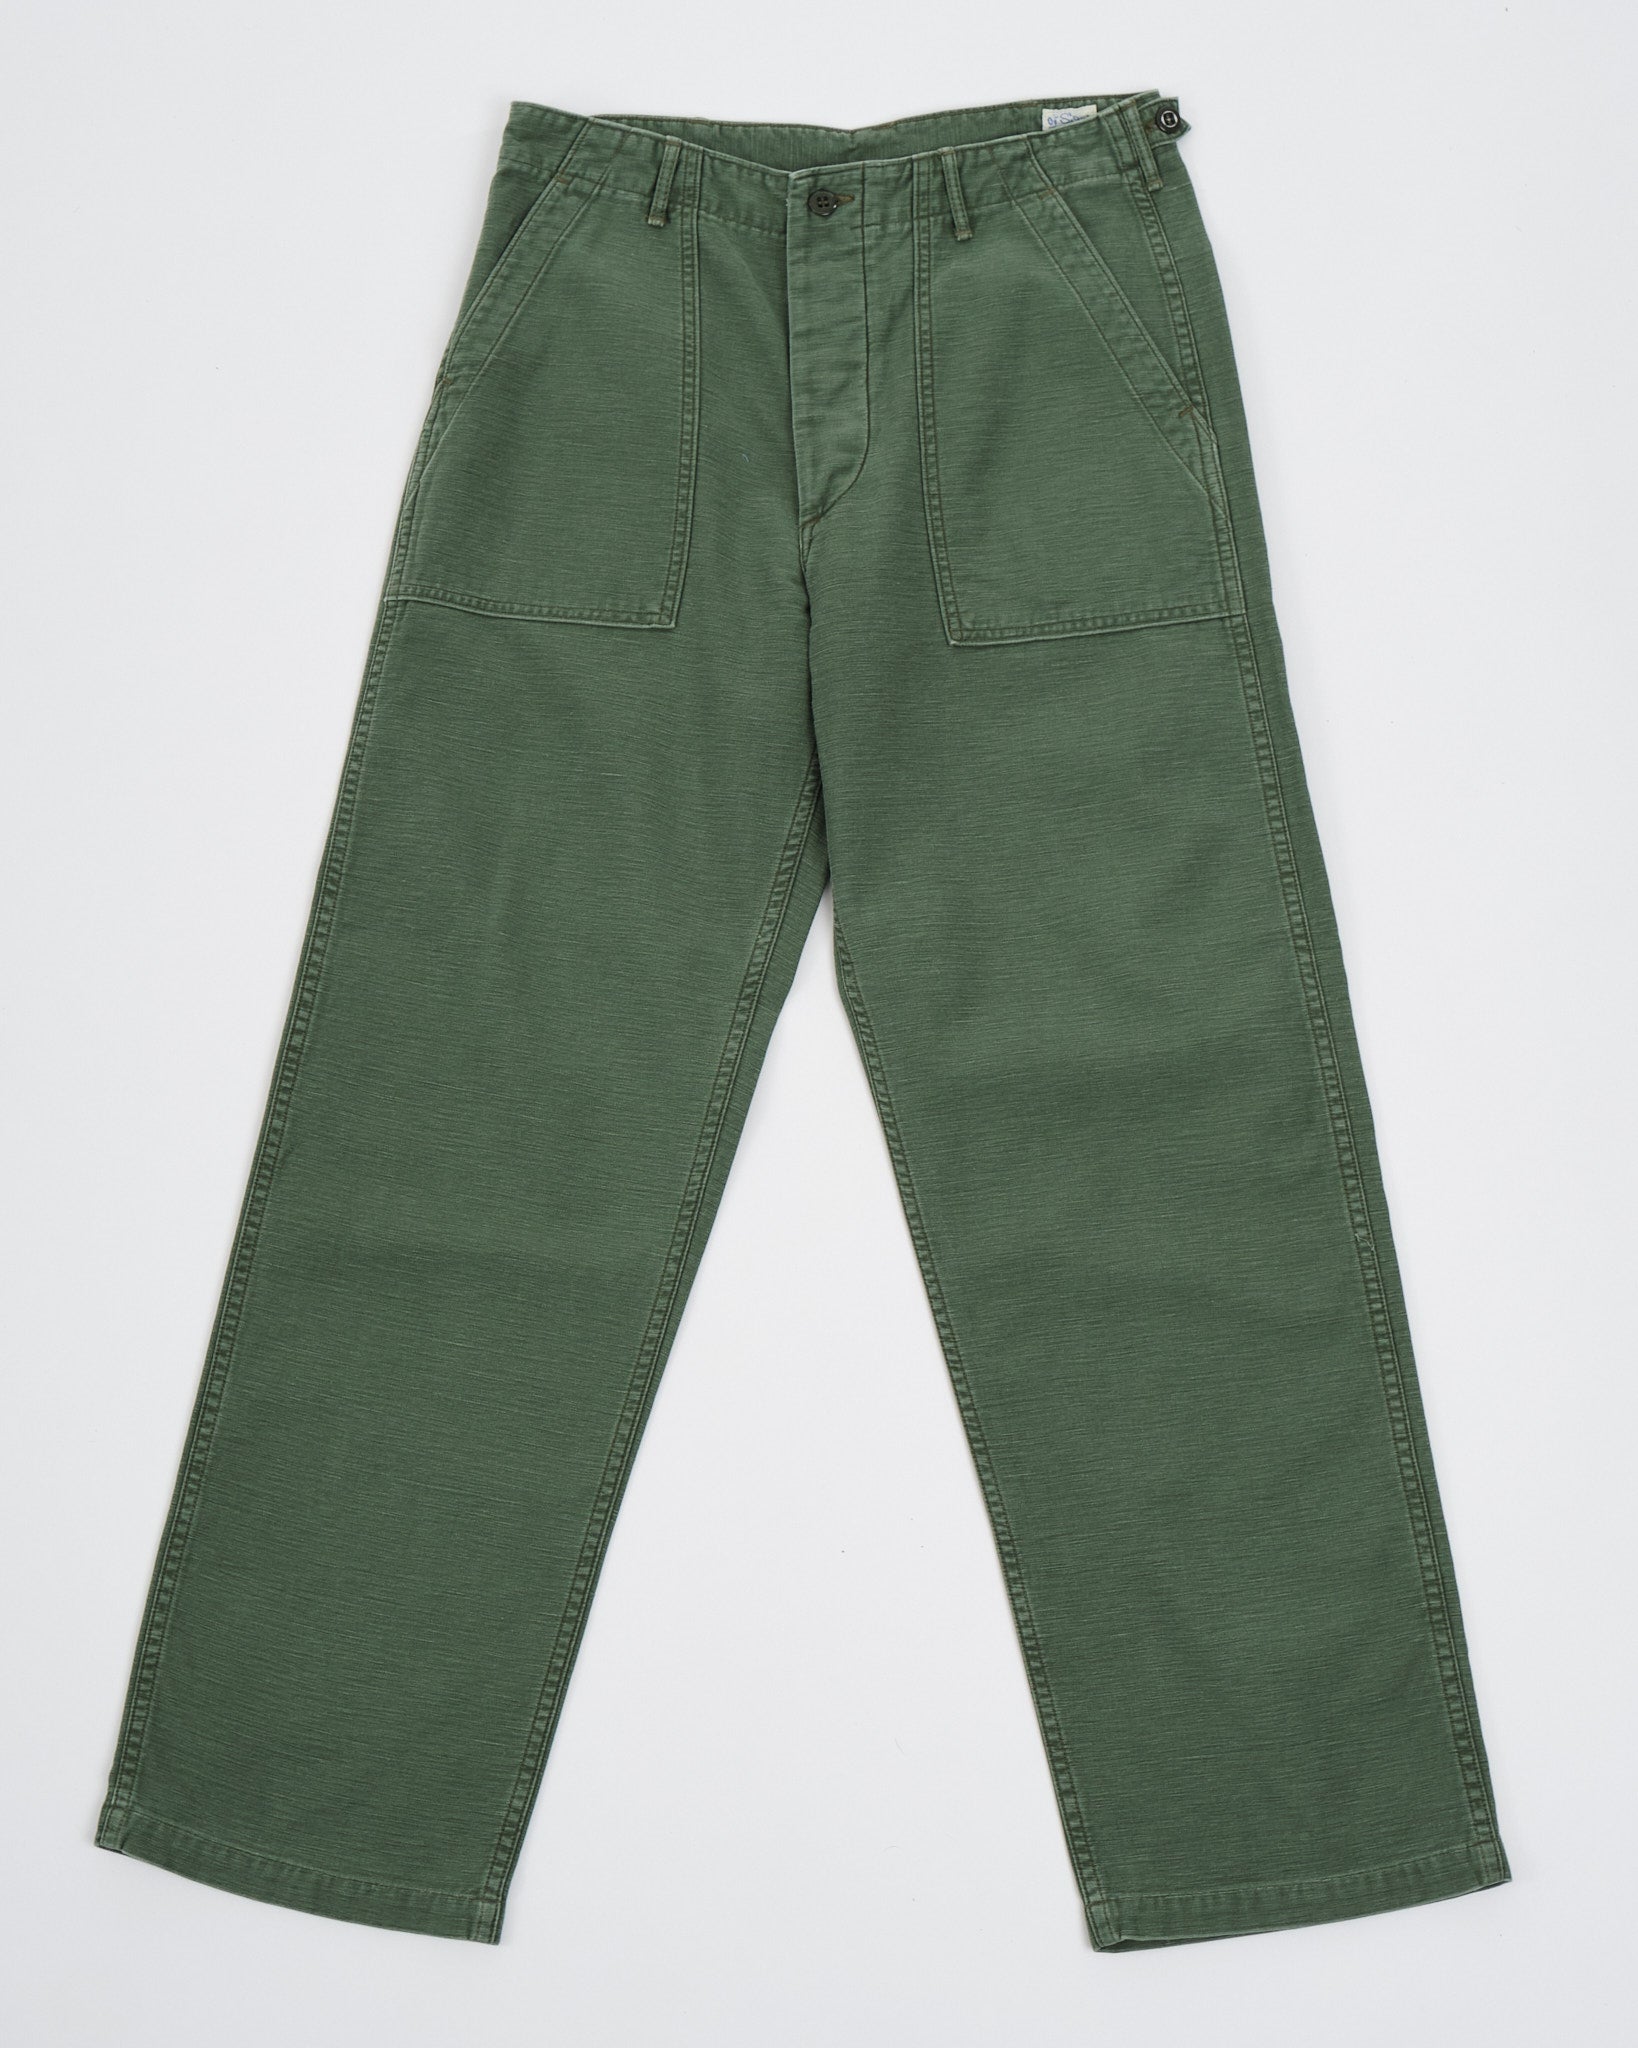 US ARMY FATIGUE PANTS GREEN USED WASH REGULAR FIT - Meadow